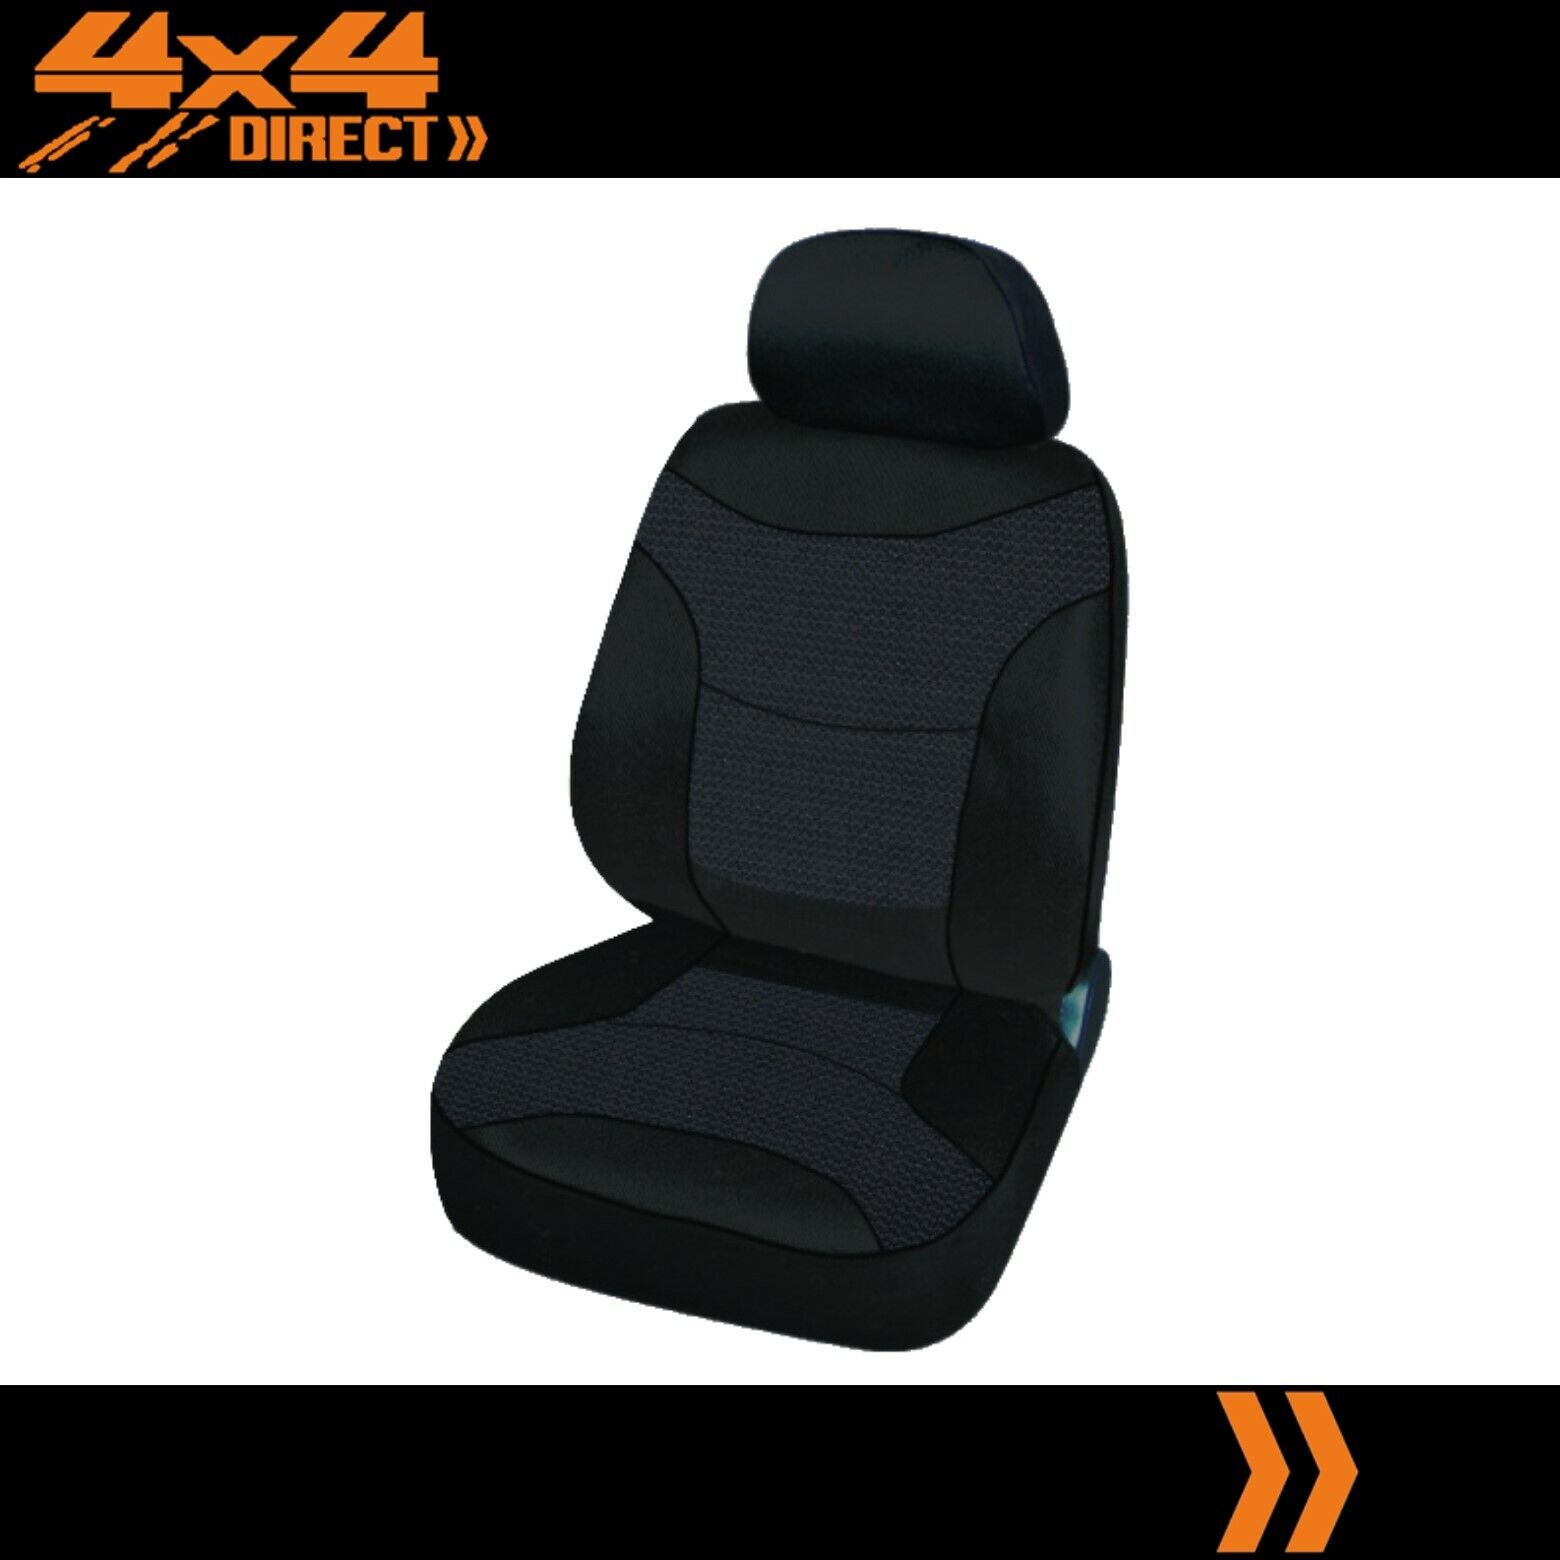 SINGLE BLACK MODERN JACQUARD SEAT COVER FOR FORD FPV GT F